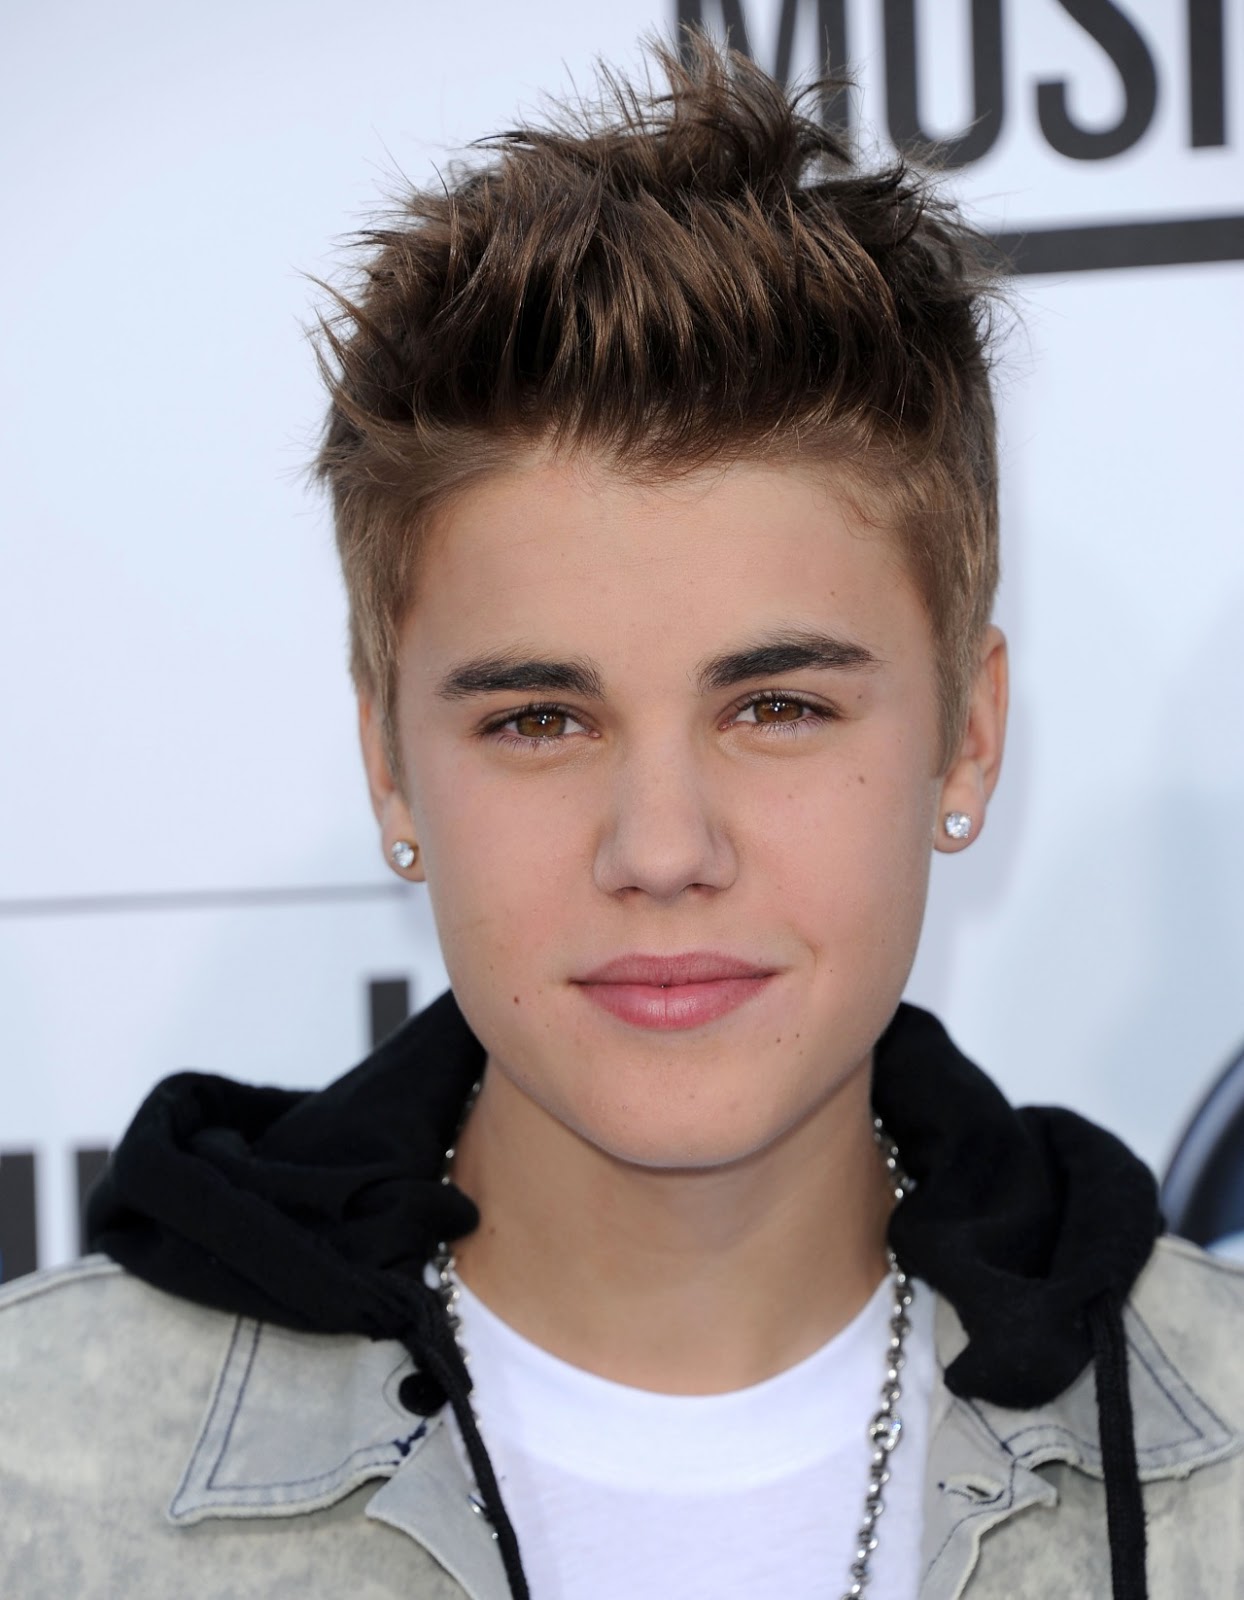 Singer Justin Bieber Hairstyle of short and long hair styles ideas